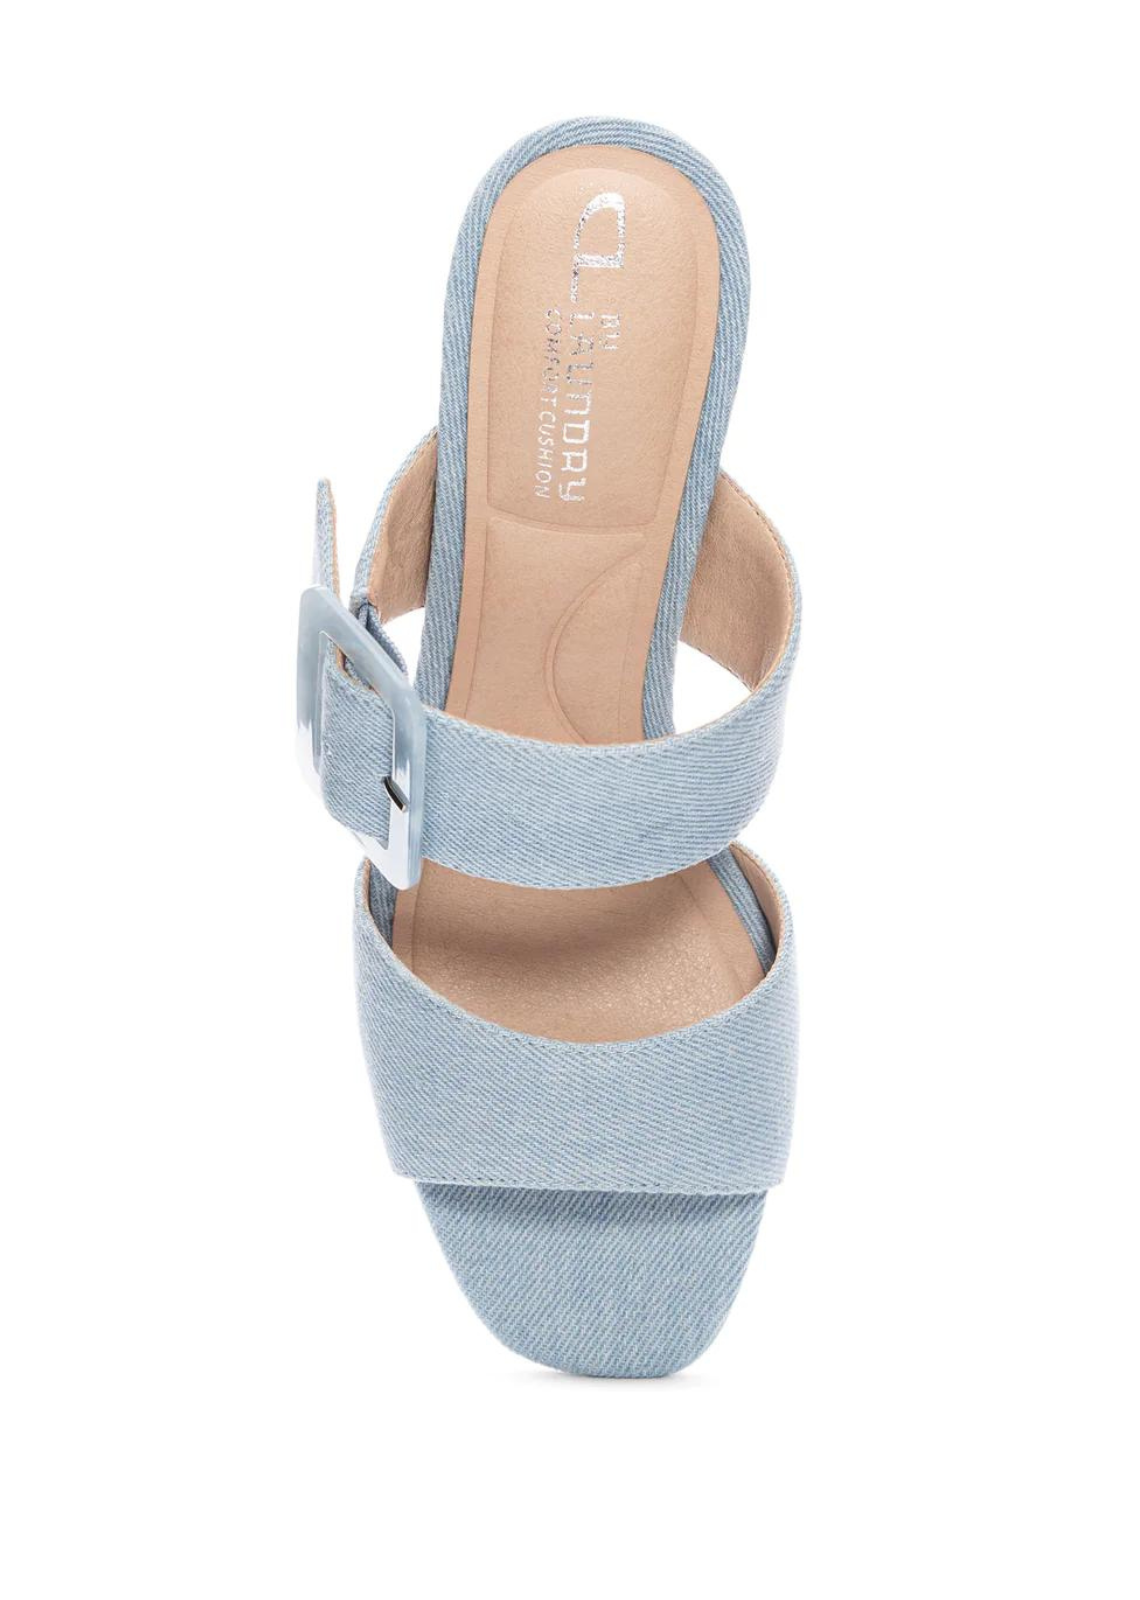 Chinese Laundry Briana Slide Sandal- Light Blue. Update warm weather looks by pairing these women's CL by Laundry Briana chambray blue sandals with your favourite jeans, skirty, dresses, and more. Crafted with textile fabric upper, these two banded resort ready sandals have a round open toe, oversized buckle detail at the instep band for a unique look, synthetic lining and padded synthetic sockliner for comfort The durable TPR outsole with stacked block heel heightens the appeal.